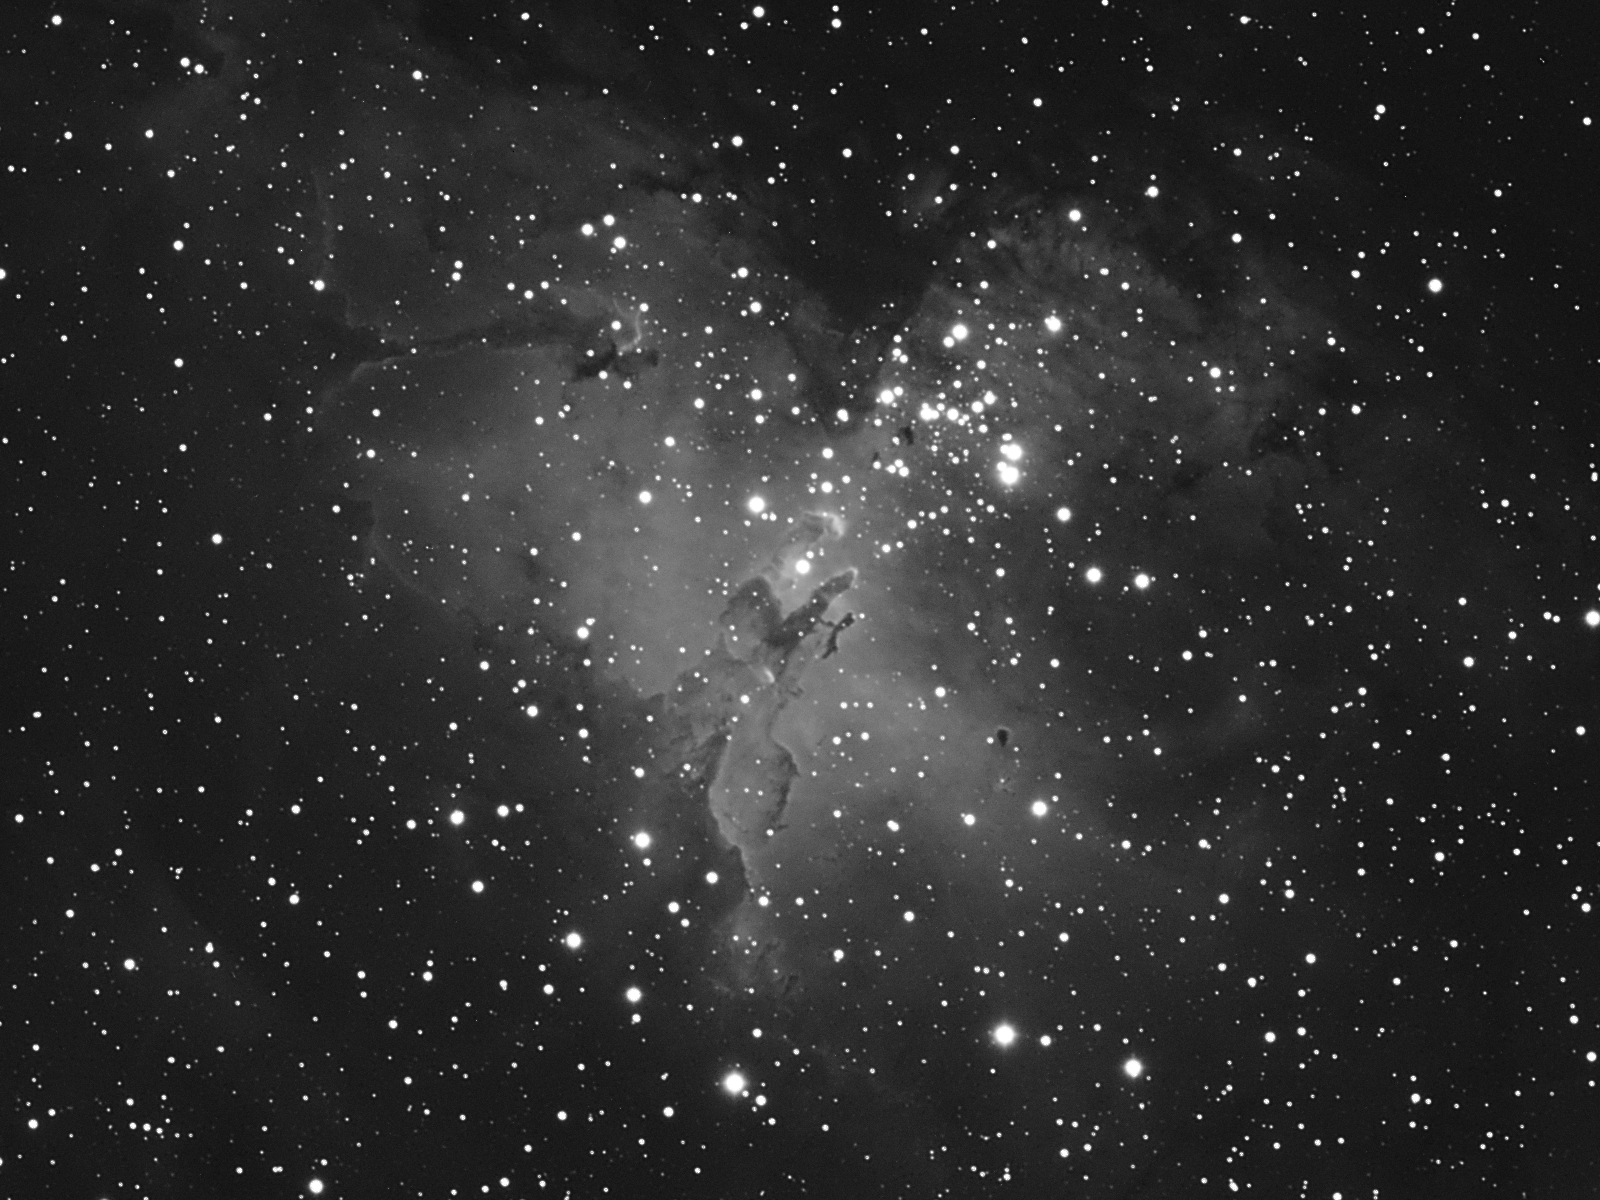 M16 at 1 arc-second - a single frame  11-May-2010